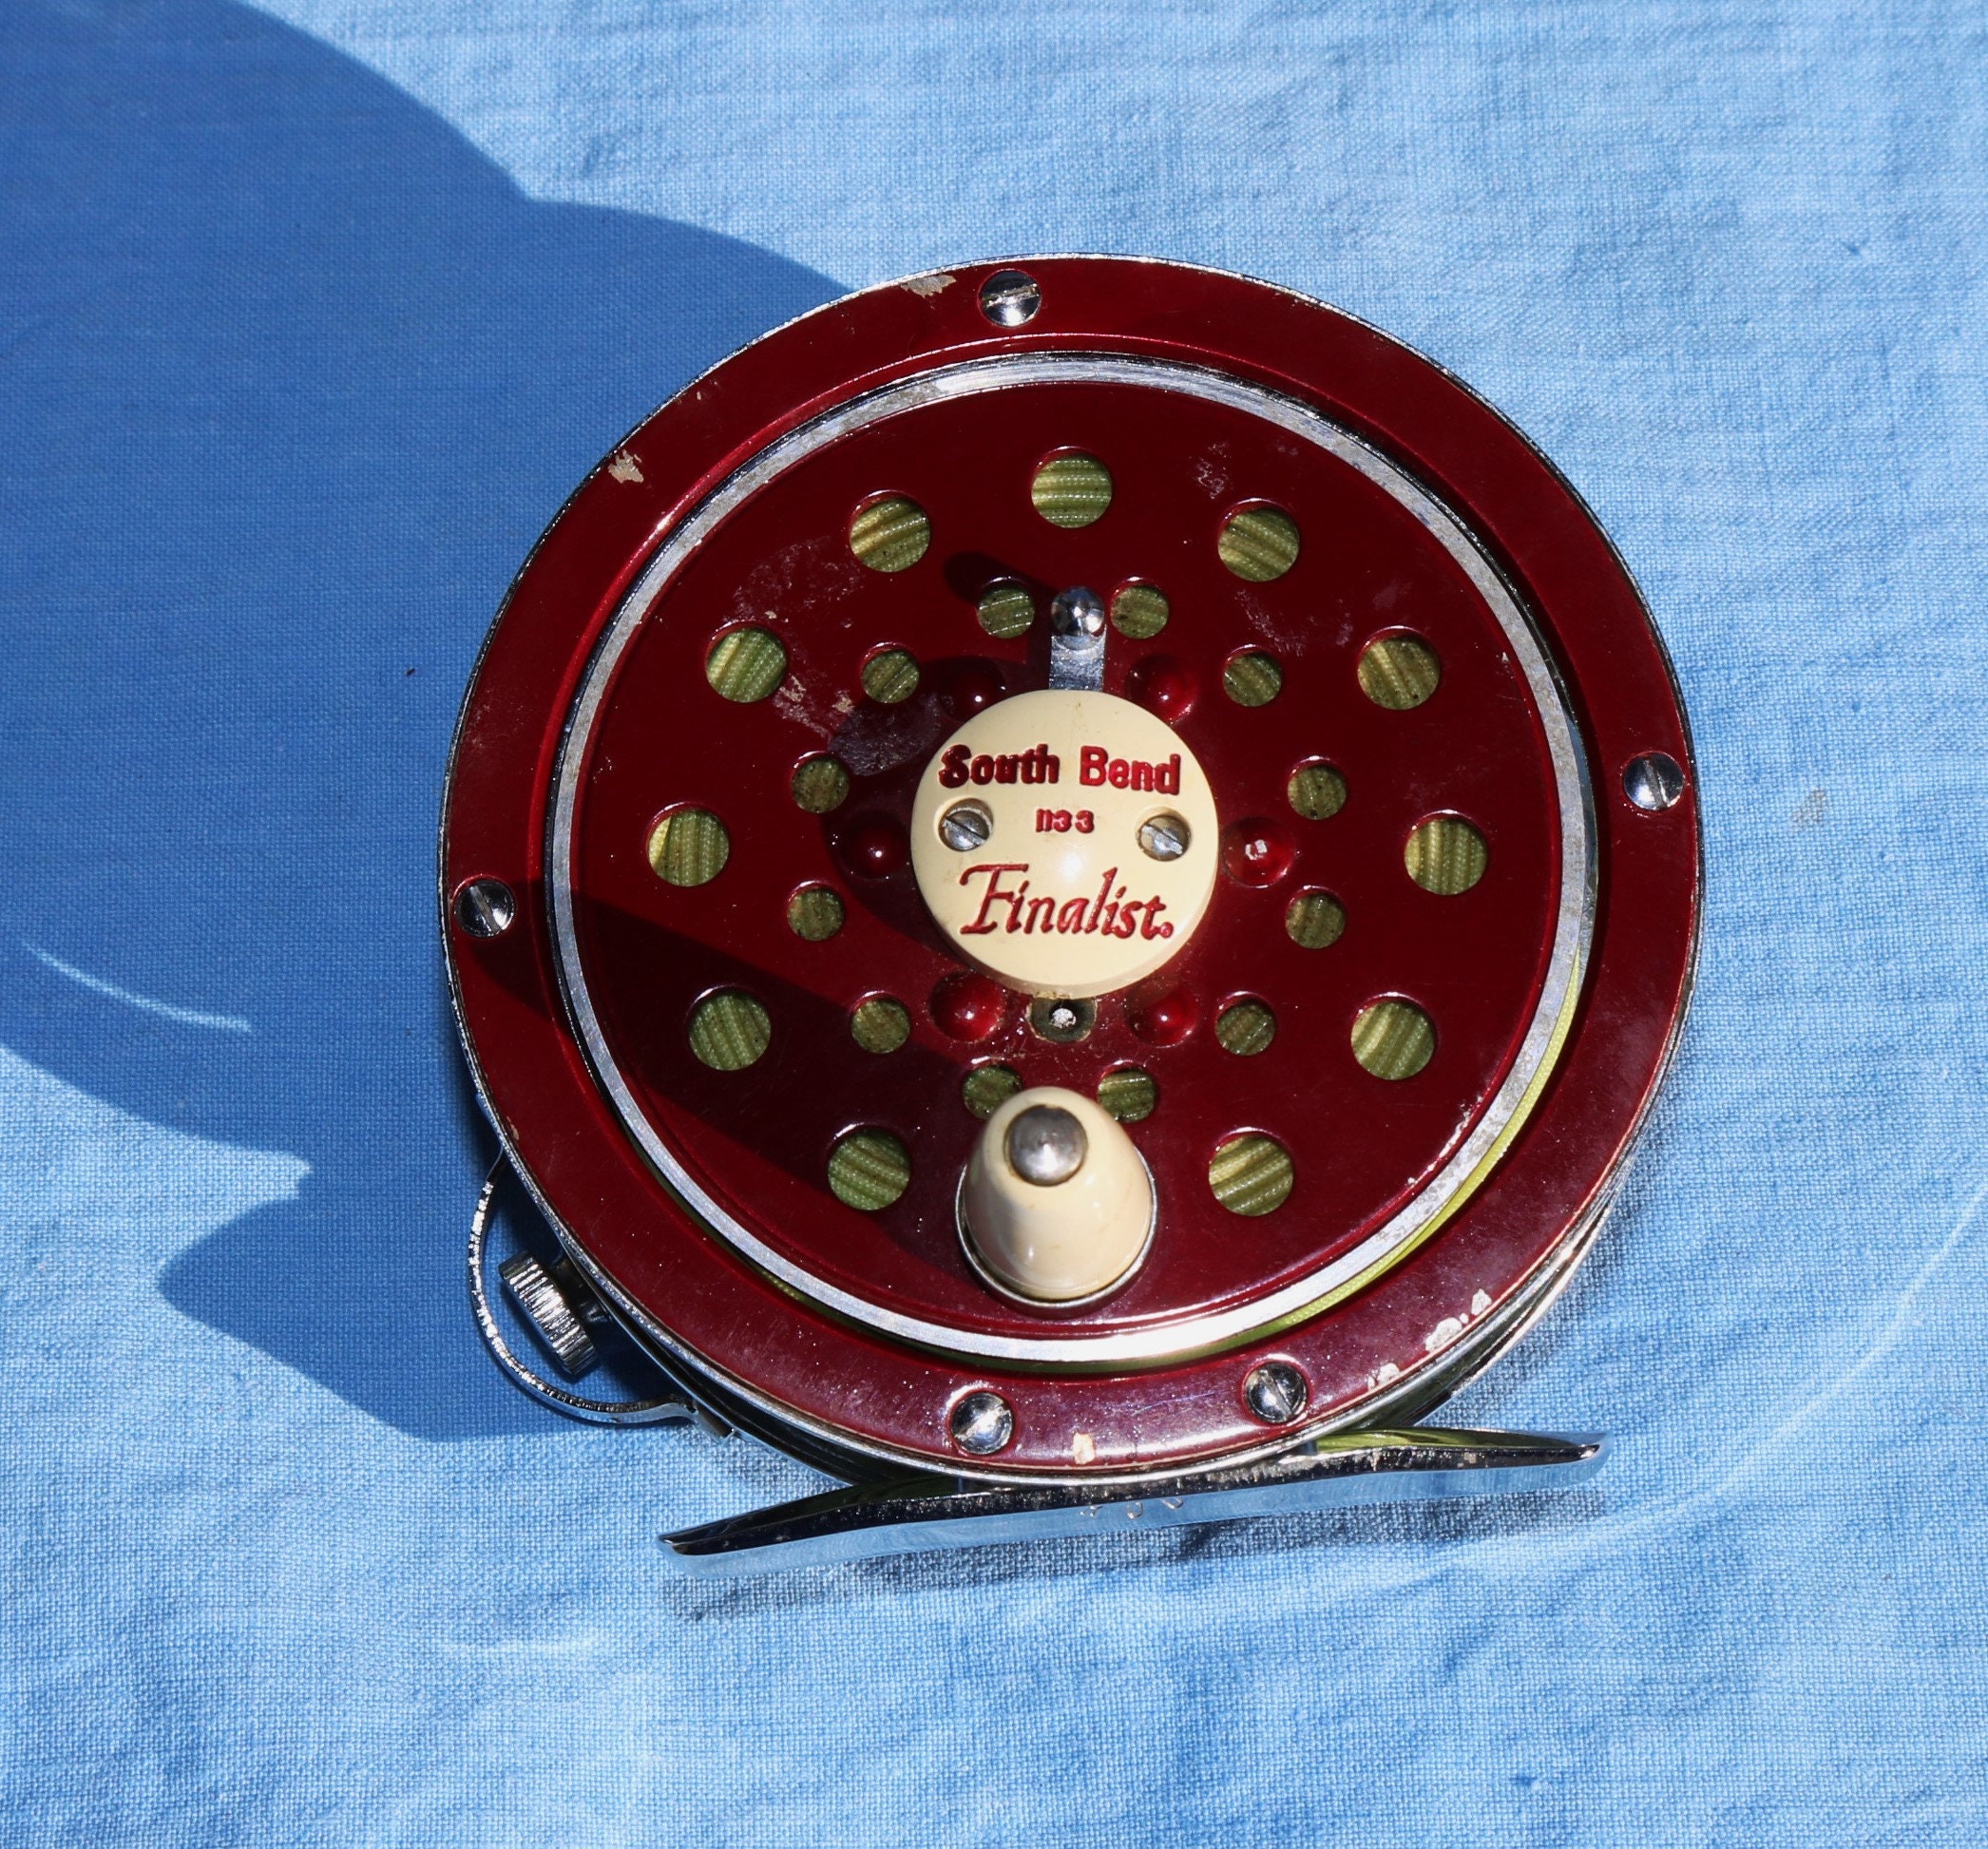 South Bend 1133 Finalist Fly Reel with Dual Brake Two Stage Drag System  Complete with almost New 4/5 Wt. line and Original Box made in Japan